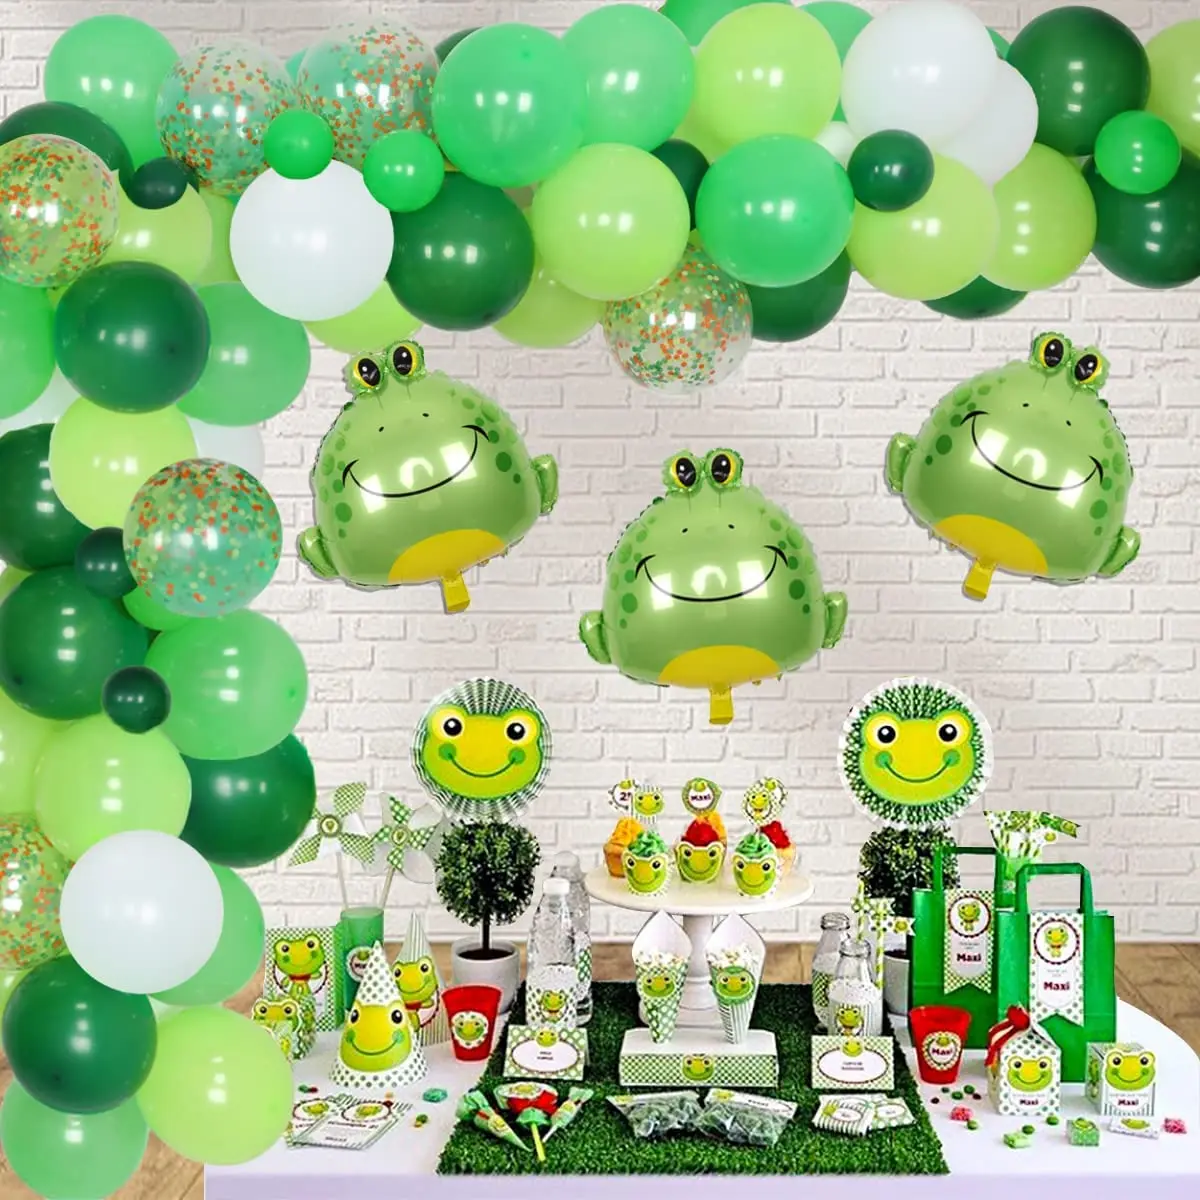 Insect Animal Themed Party Supplies Baby Shower Frog Party Decorations Green Balloon Garland Kit with Walking Frog Foil Balloons for Kids Birthday 